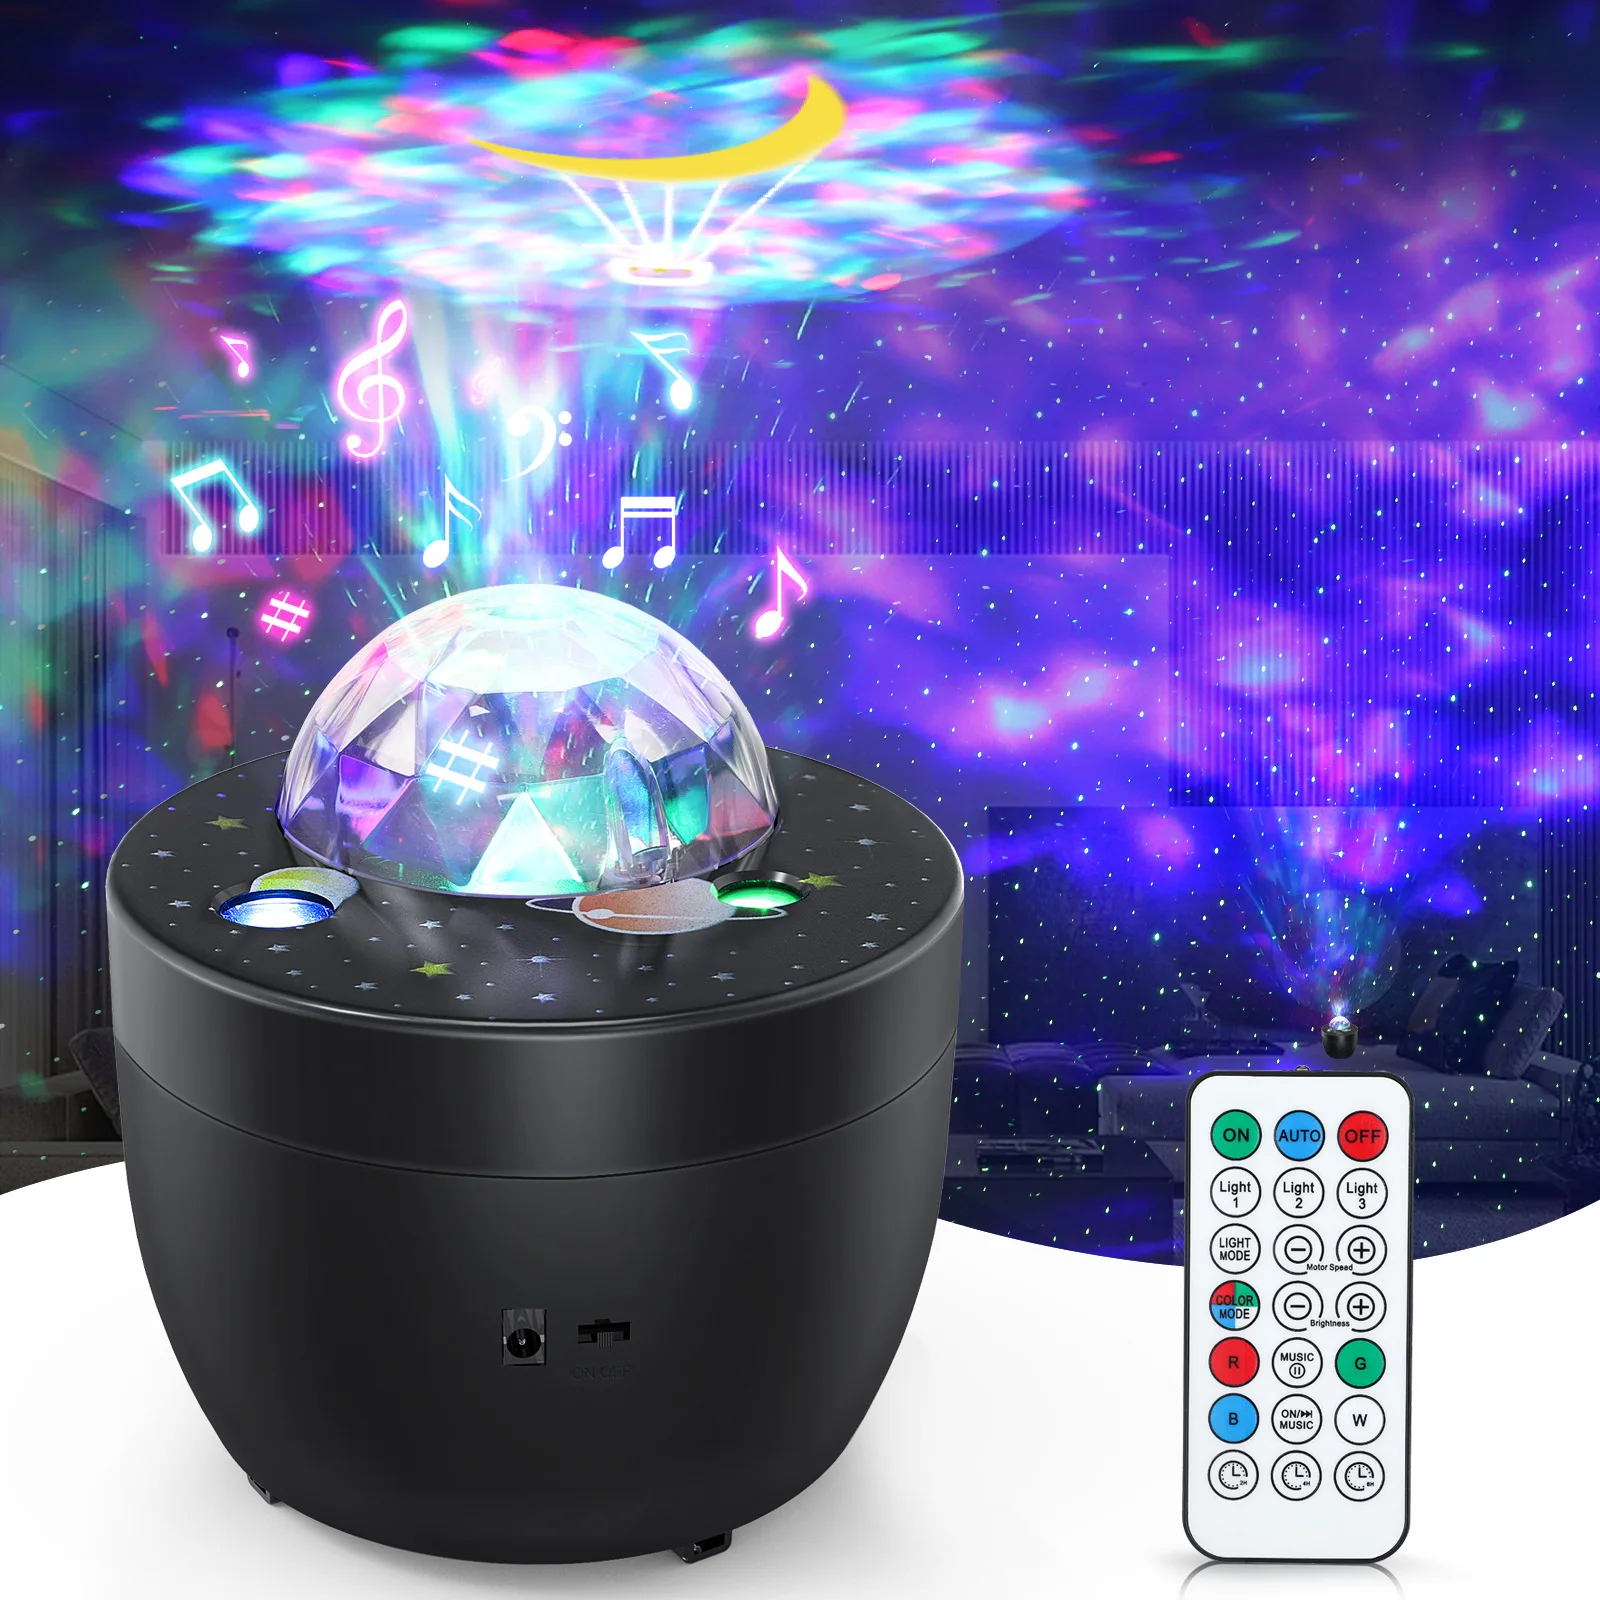 Enlarge Galaxy Projector Dropshipping Ocean Wave Starry Sky Projection Lamp 360 Degree Rotating, Music Night Light Children's Gift 2021